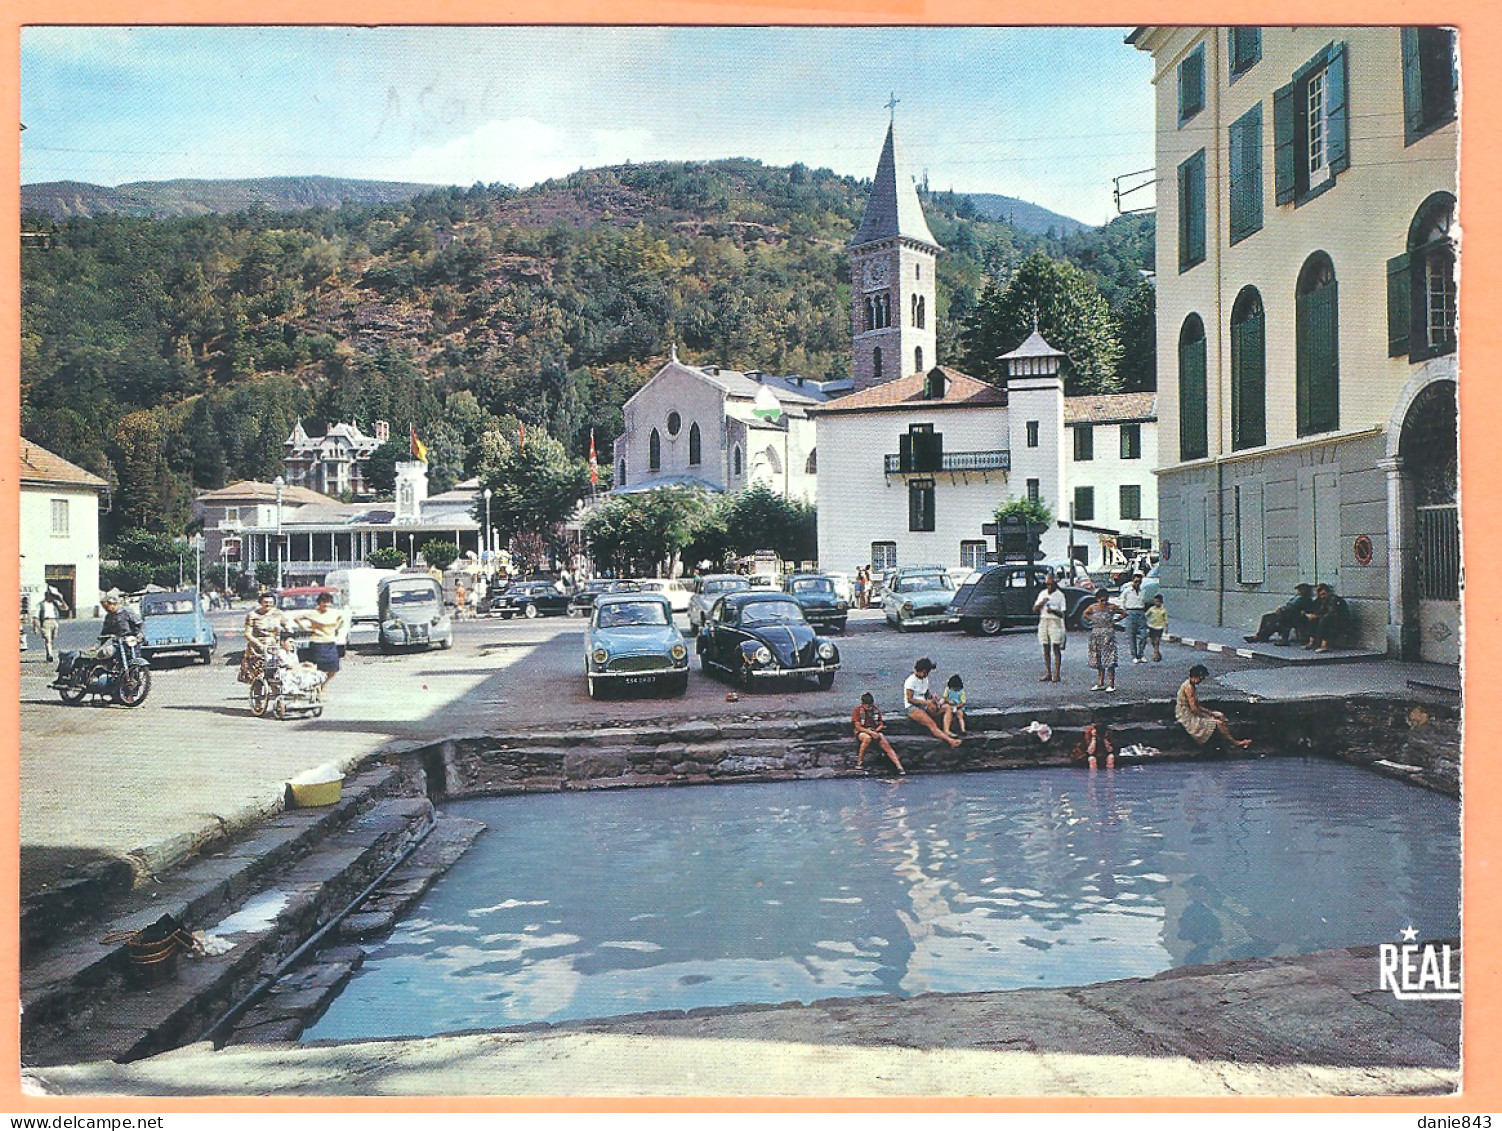 Ppgf/ CPSM Grand Format - ARIEGE - AX LES THERMES - BASSIN DES LADRES - Animation, Aronde, Coccinelle, Moto - Ax Les Thermes